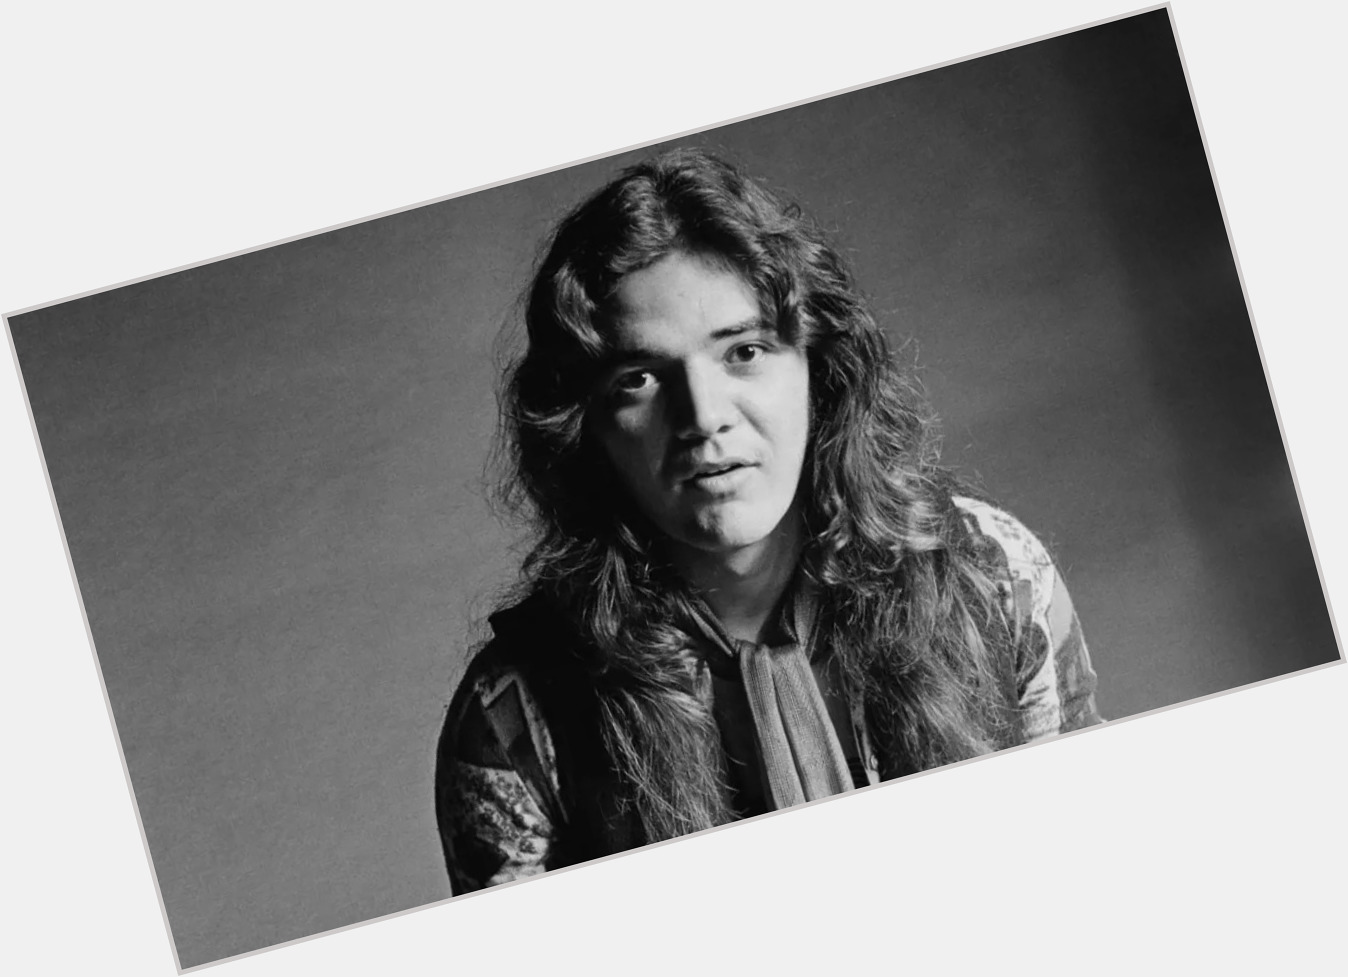 Happy birthday Tommy Bolin! Always my inspiration. You are missed! 